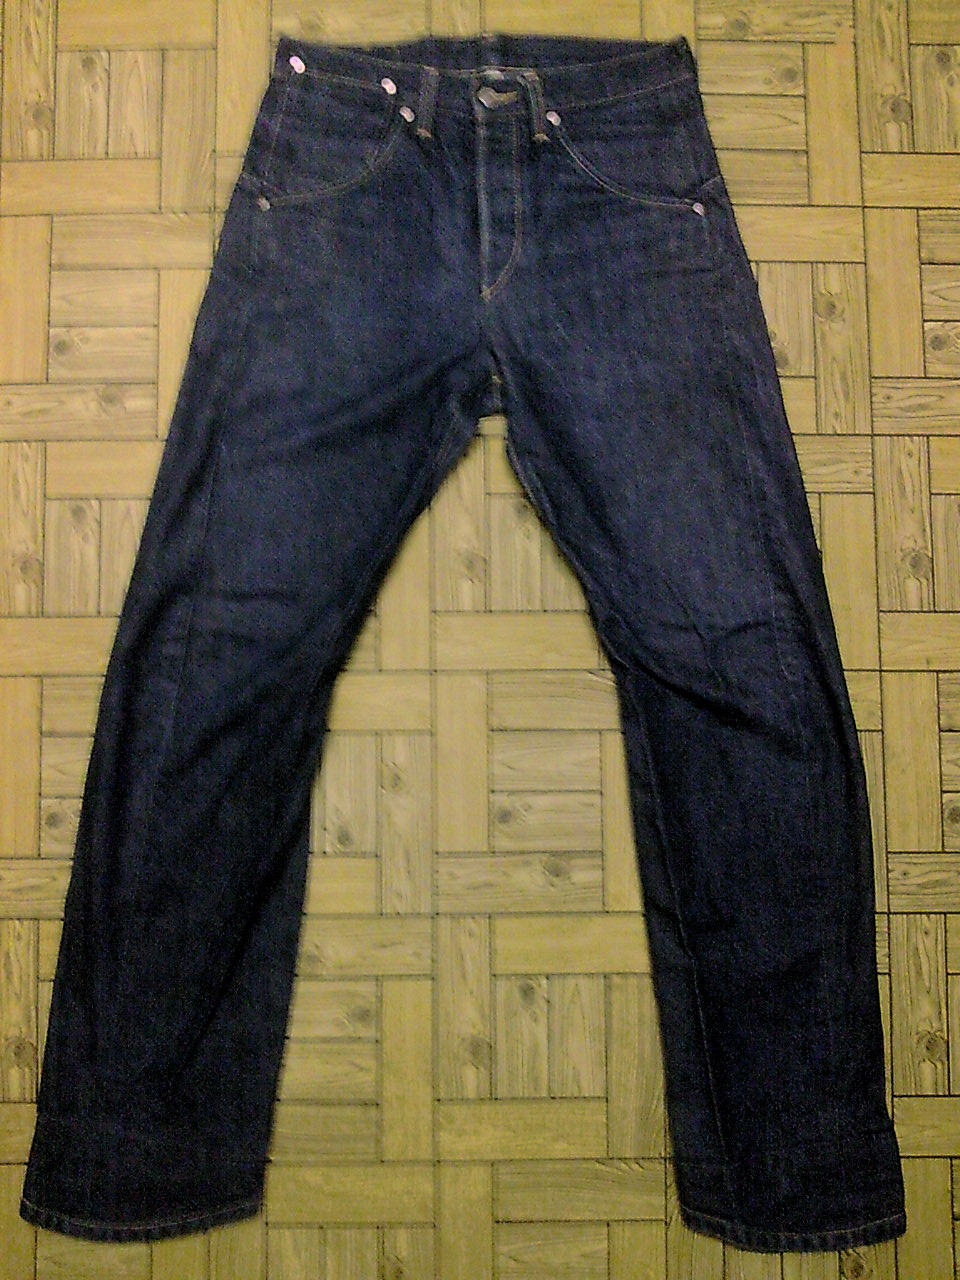 LEVI'S ENGINEERED JEANS SIZE 29 (SOLD) ~ different class bundle